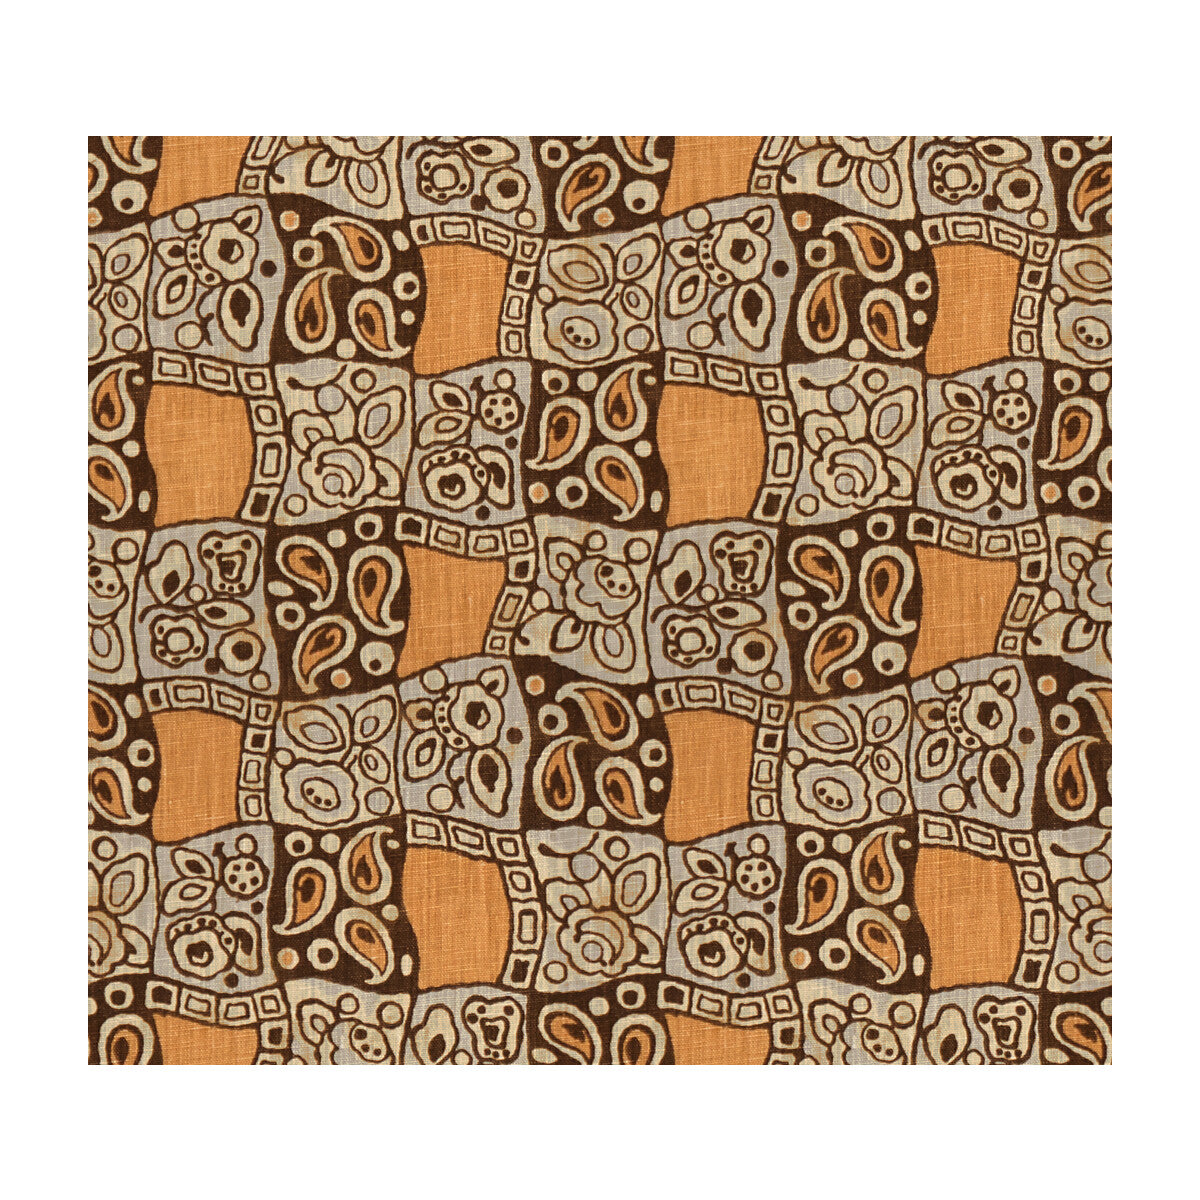 Margaret fabric in whiskey/brown color - pattern 2015110.684.0 - by Lee Jofa in the Bunny Williams collection